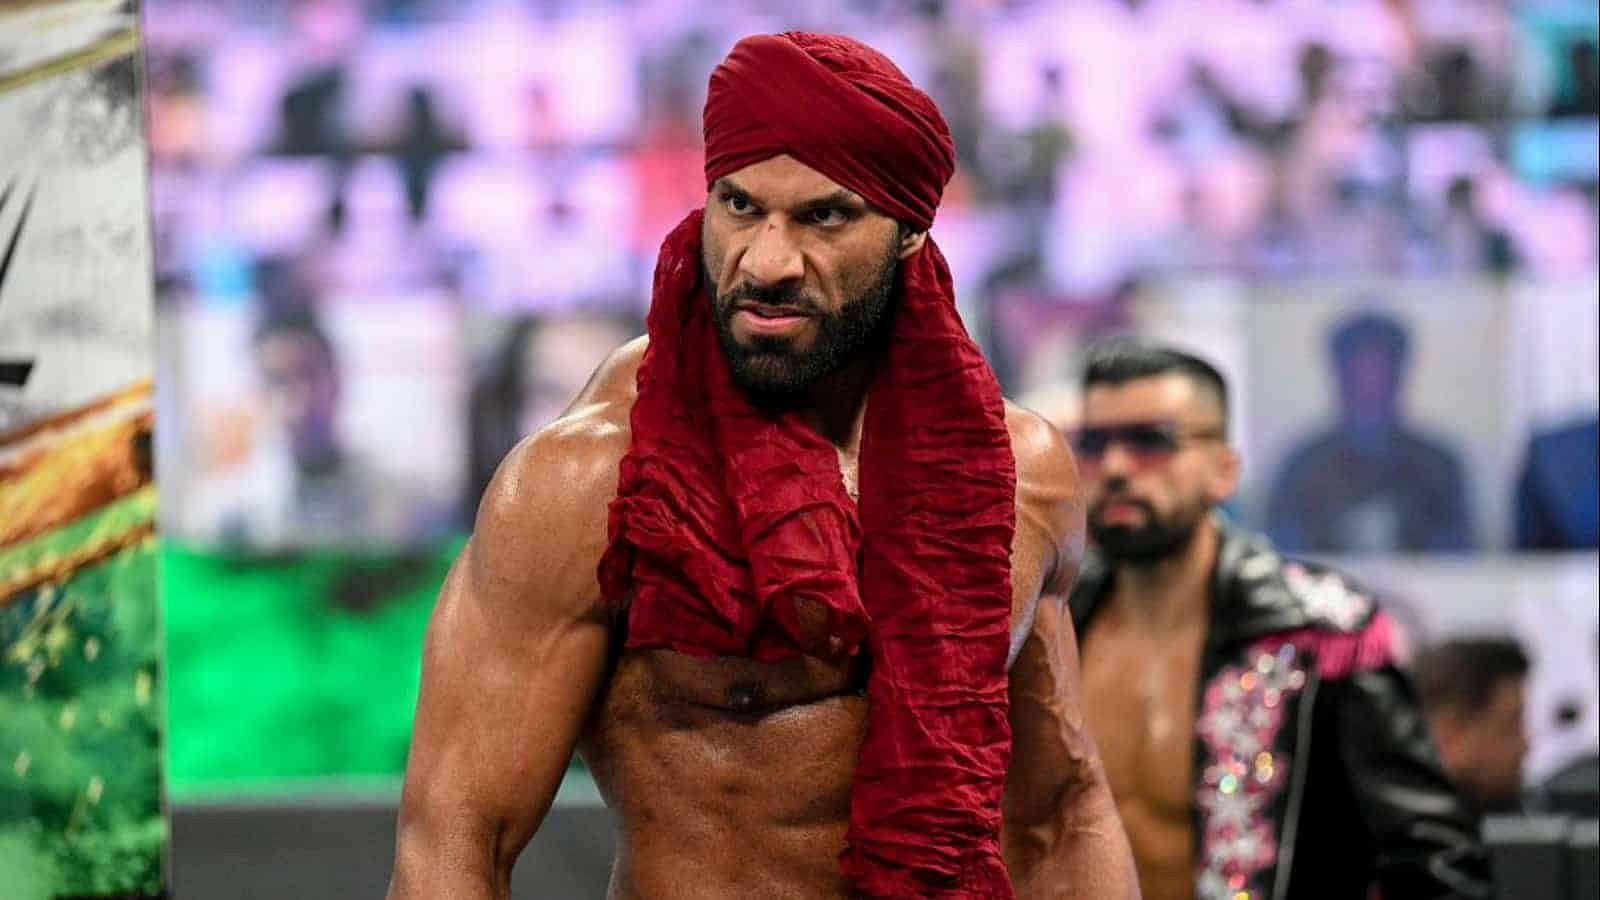 Mahal is set to face Ricochet for the WWE Intercontinental Championship on SmackDown.